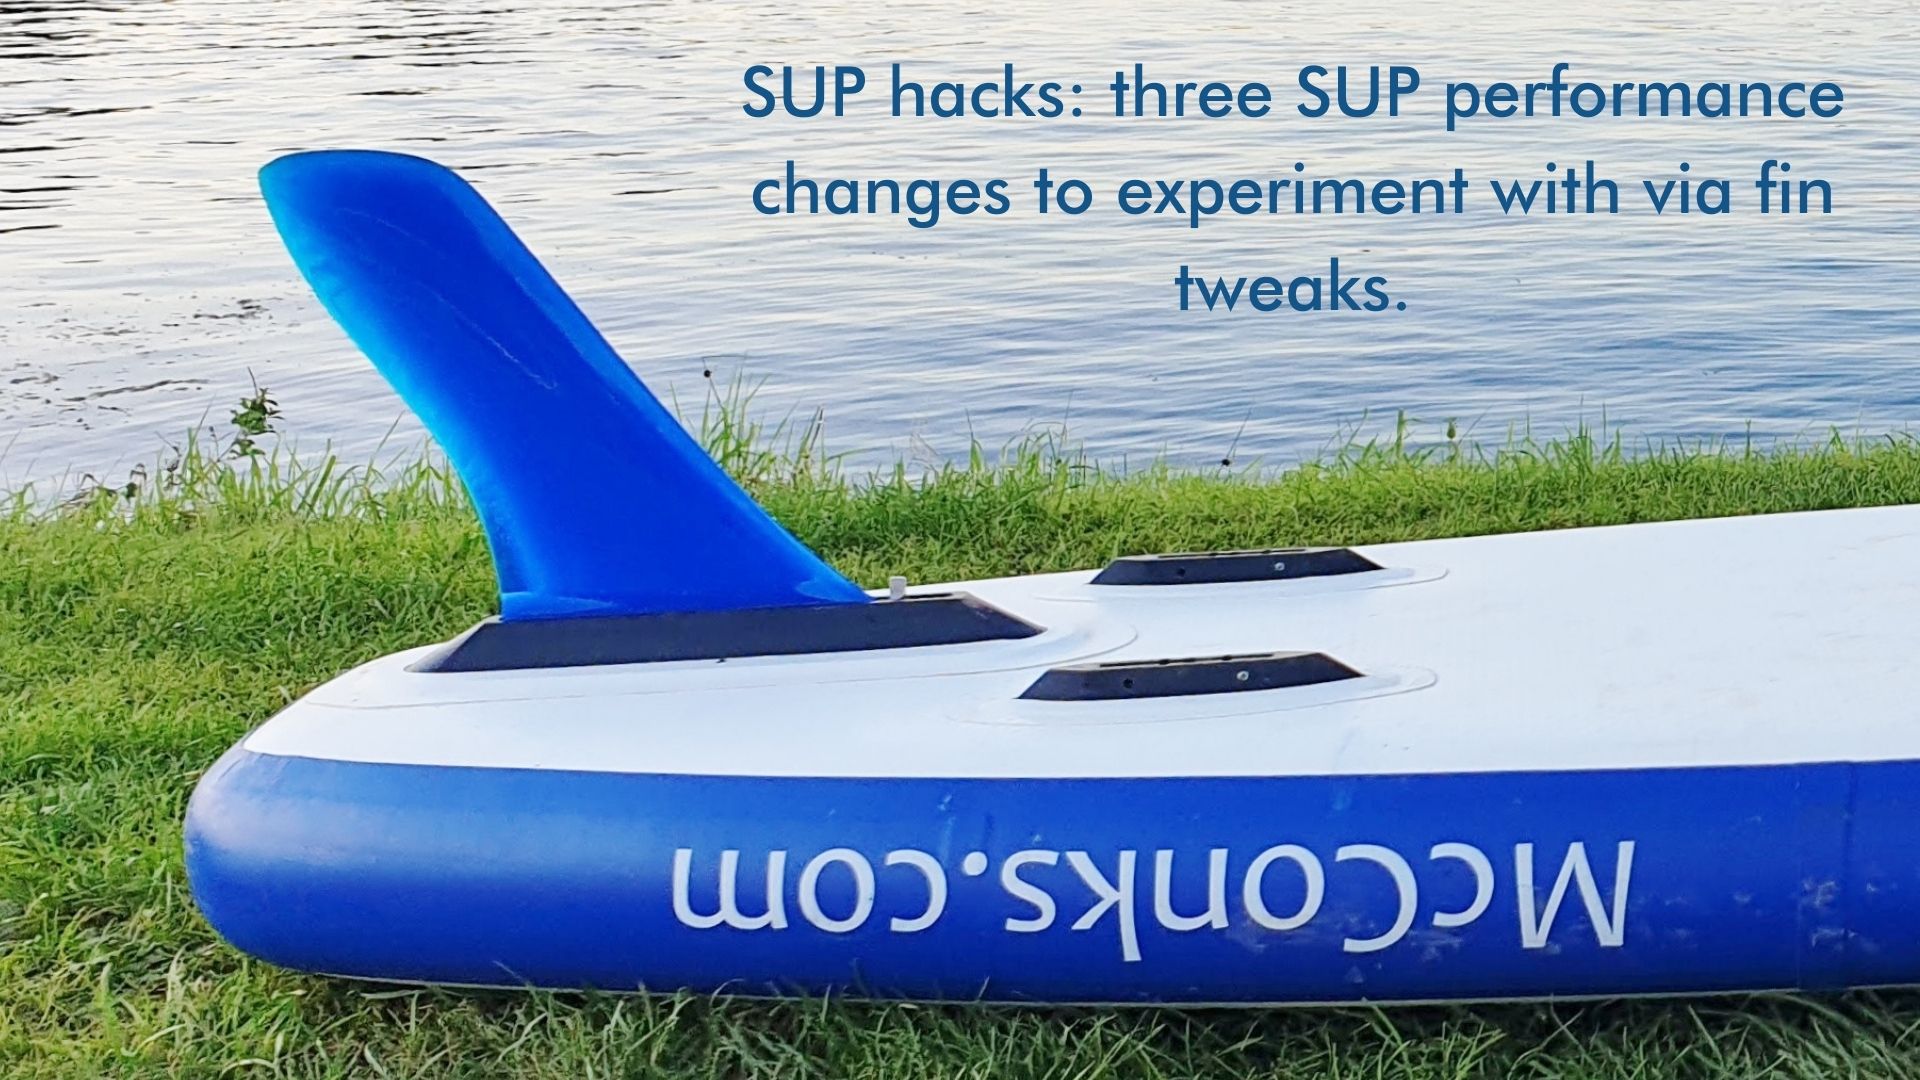 SUP hacks three SUP performance changes to experiment with via fin tweaks. #1